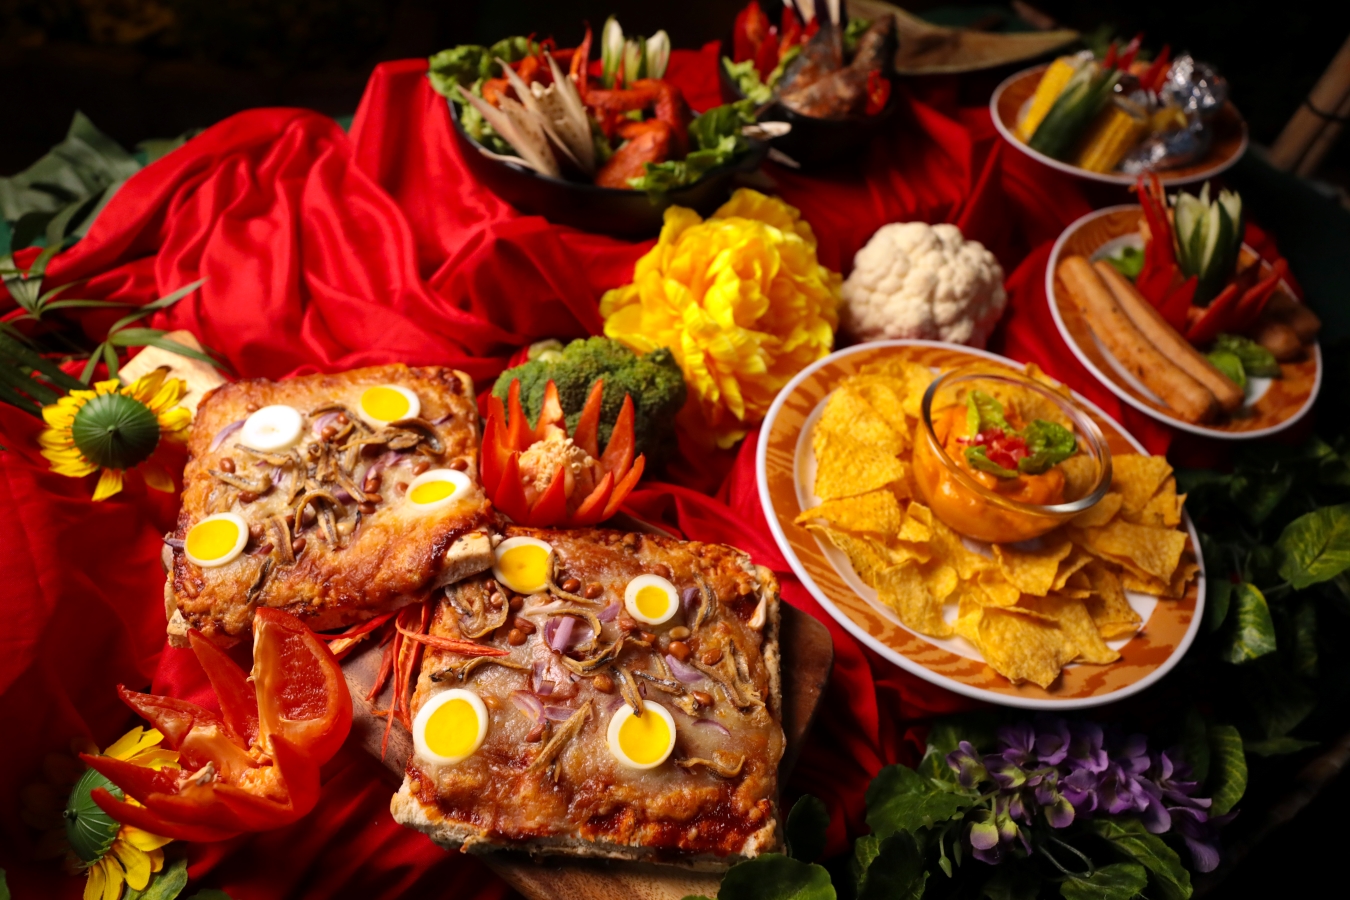 A barbecue feast awaits at dinnertime, complete with nasi lemak pizza and nachos.